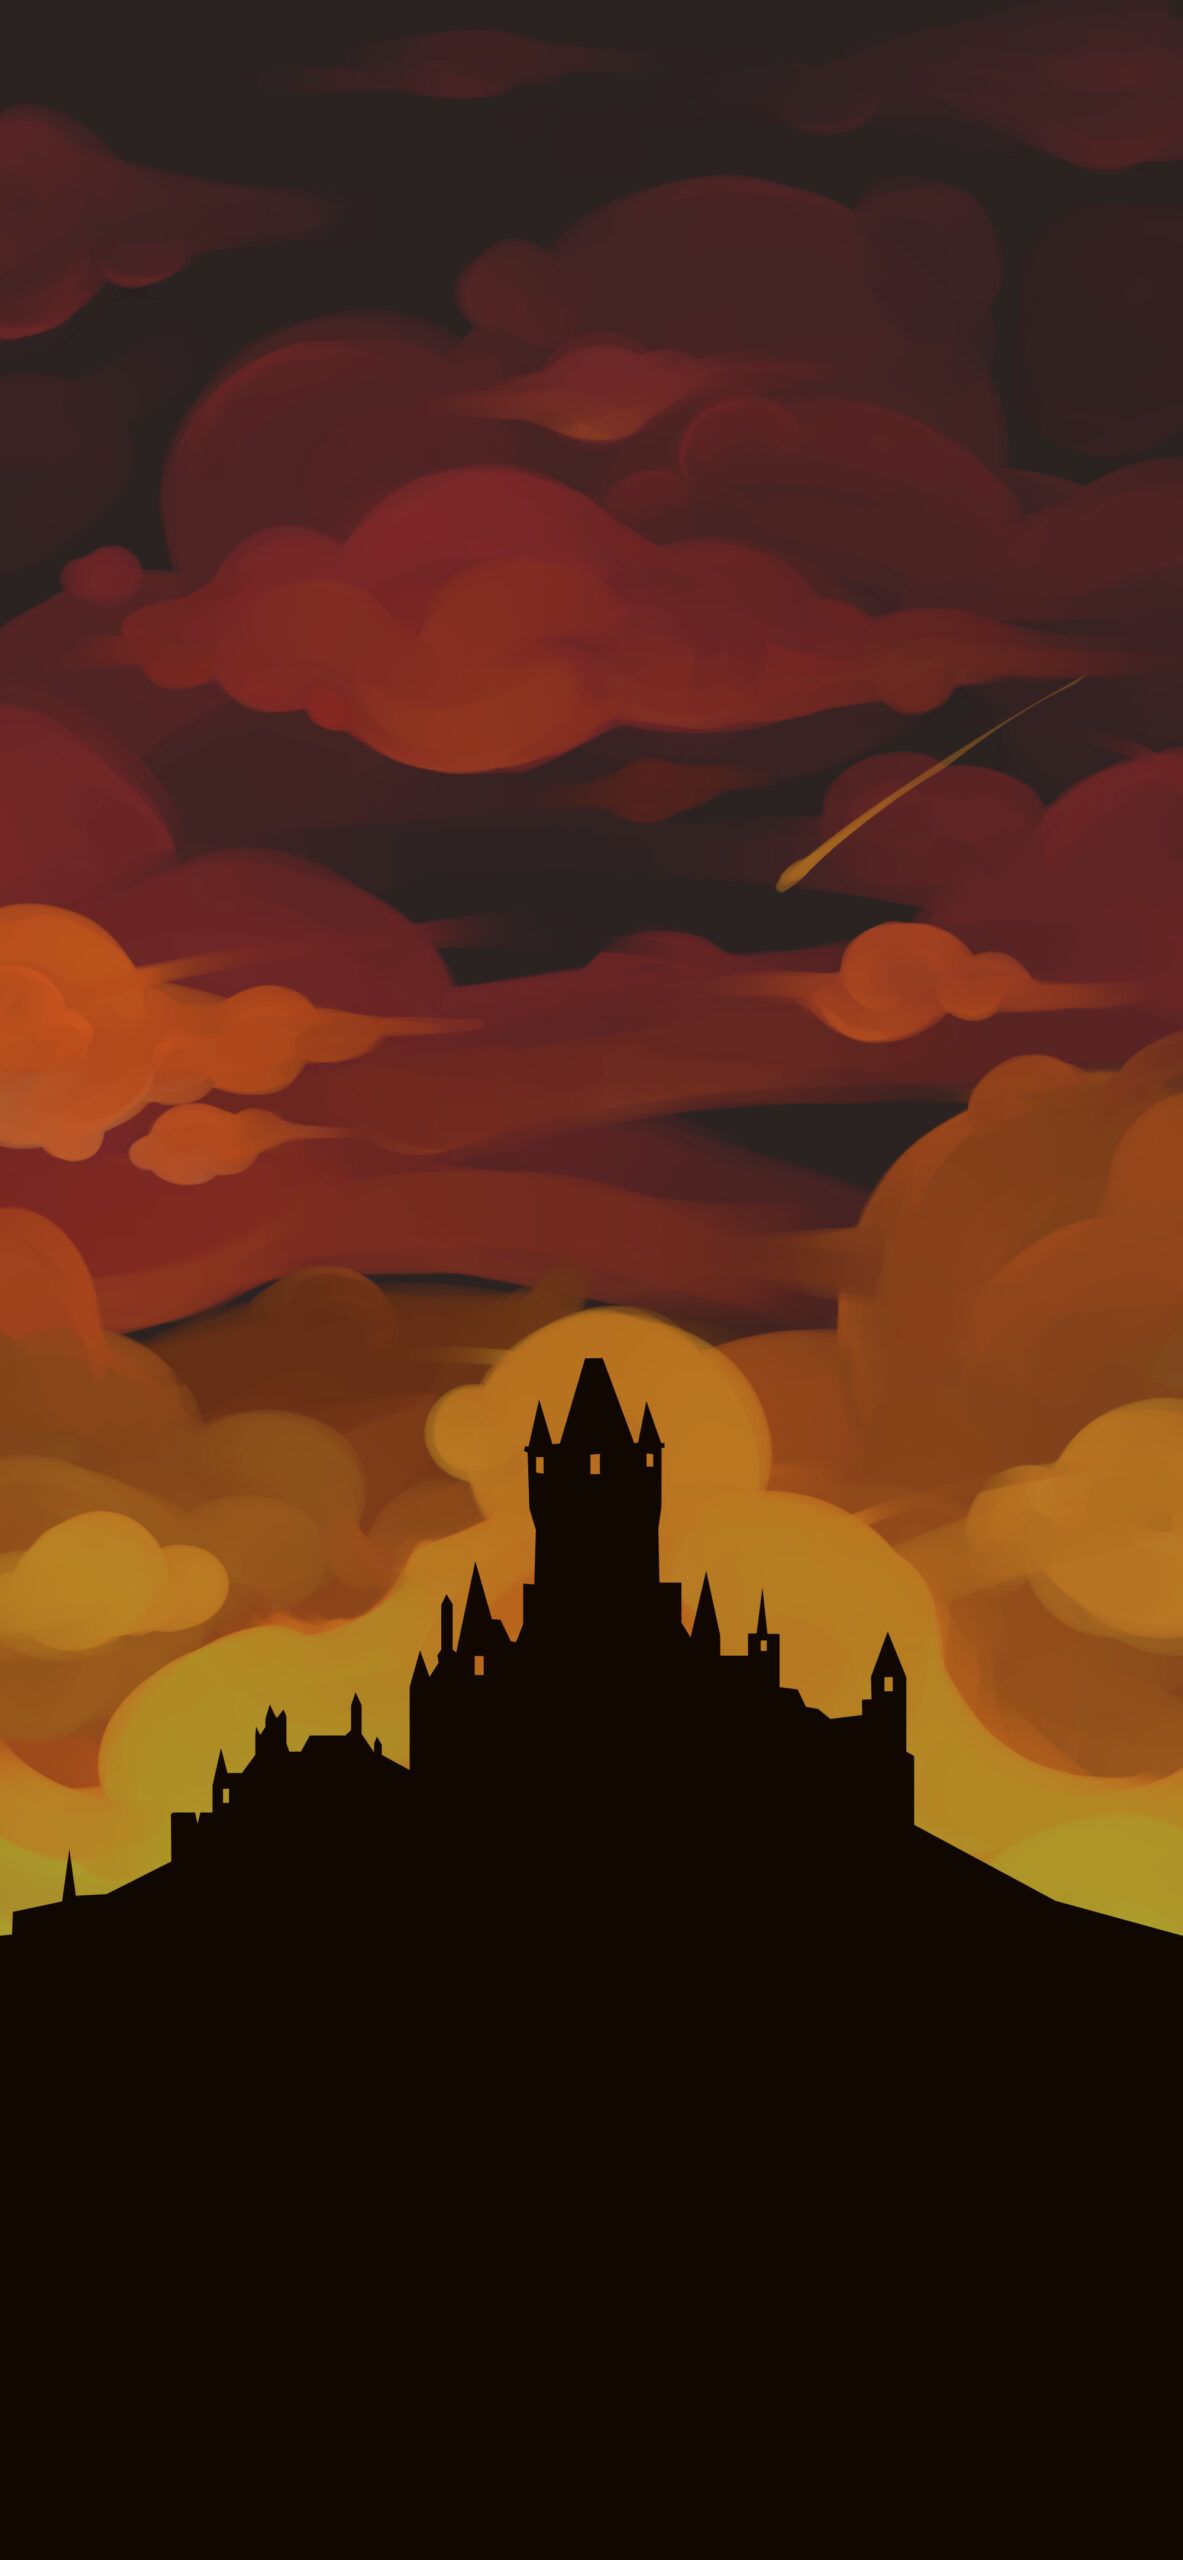 Castle on a hill at sunset - Castle